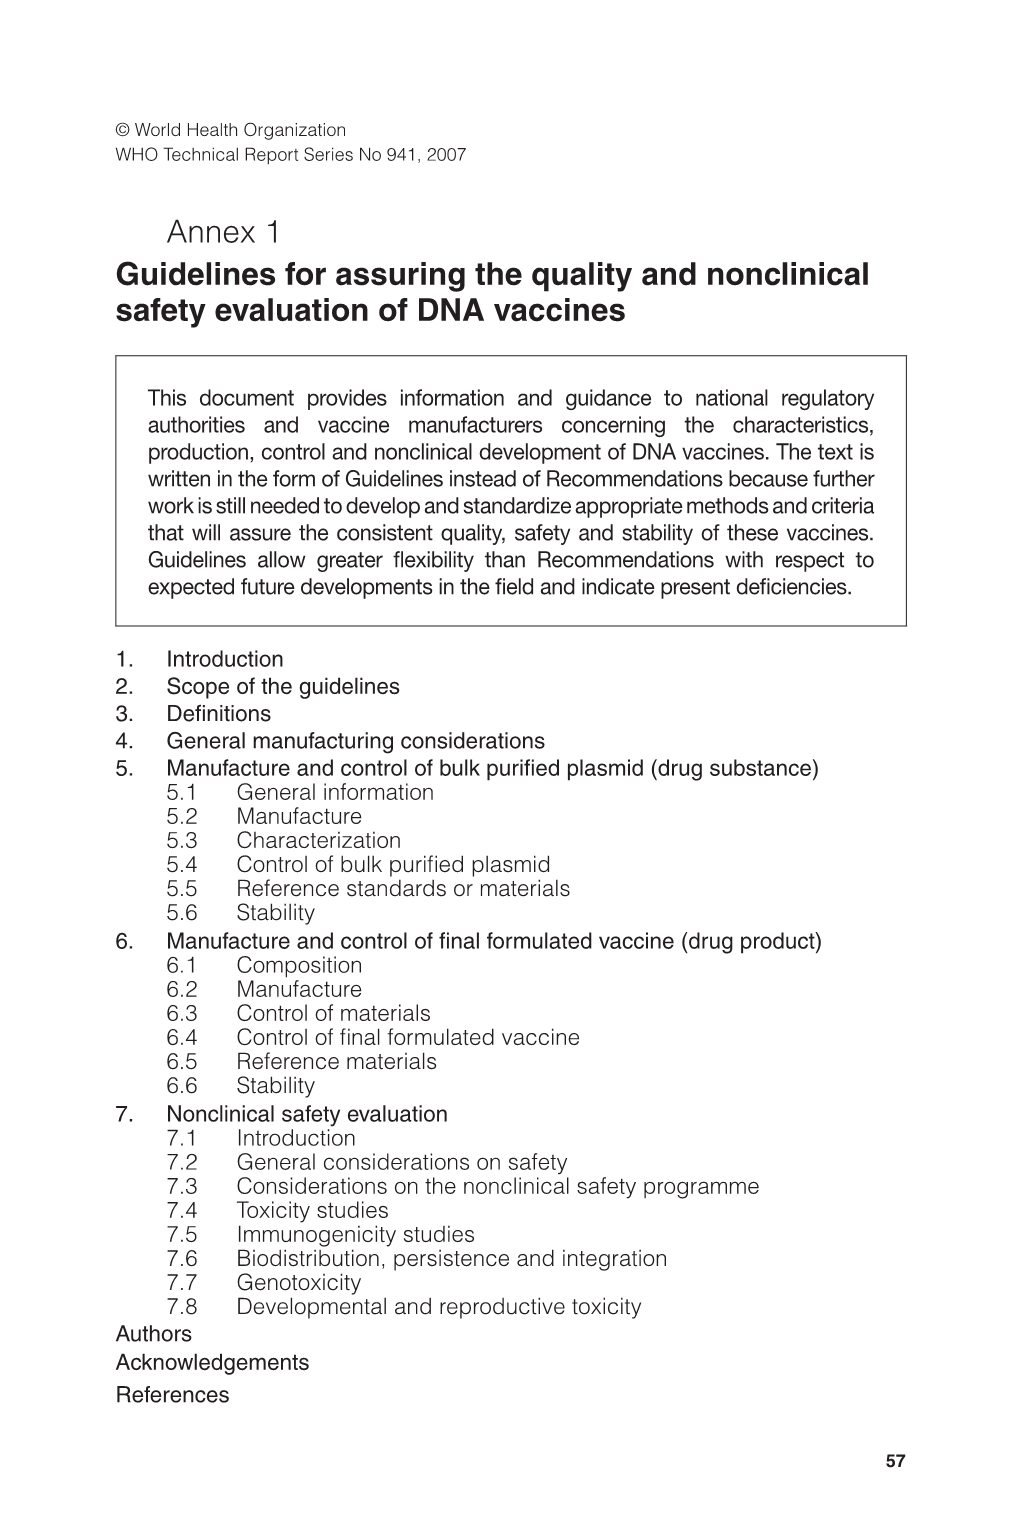 Annex 1 Guidelines for Assuring the Quality and Nonclinical Safety Evaluation of DNA Vaccines